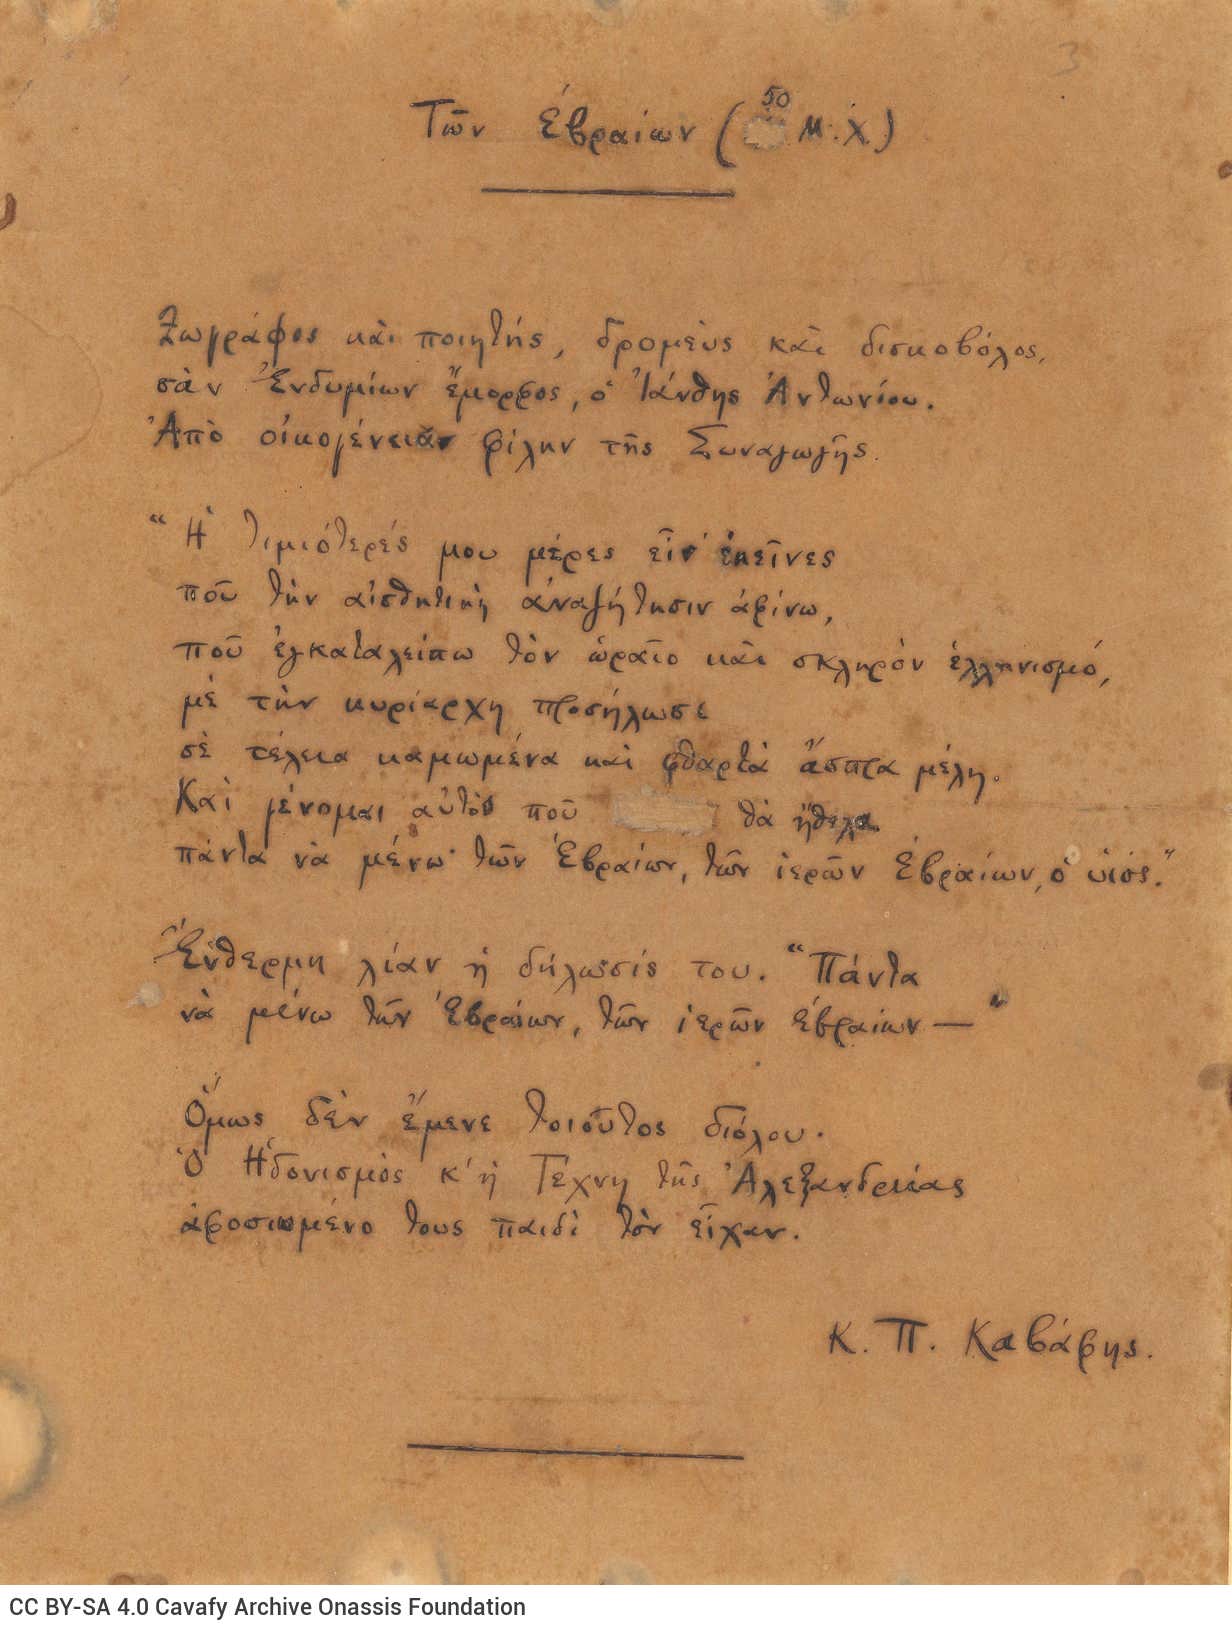 Manuscript of the poem "Of the Jews (50 A.D.)". Number "3" in pencil at the top.